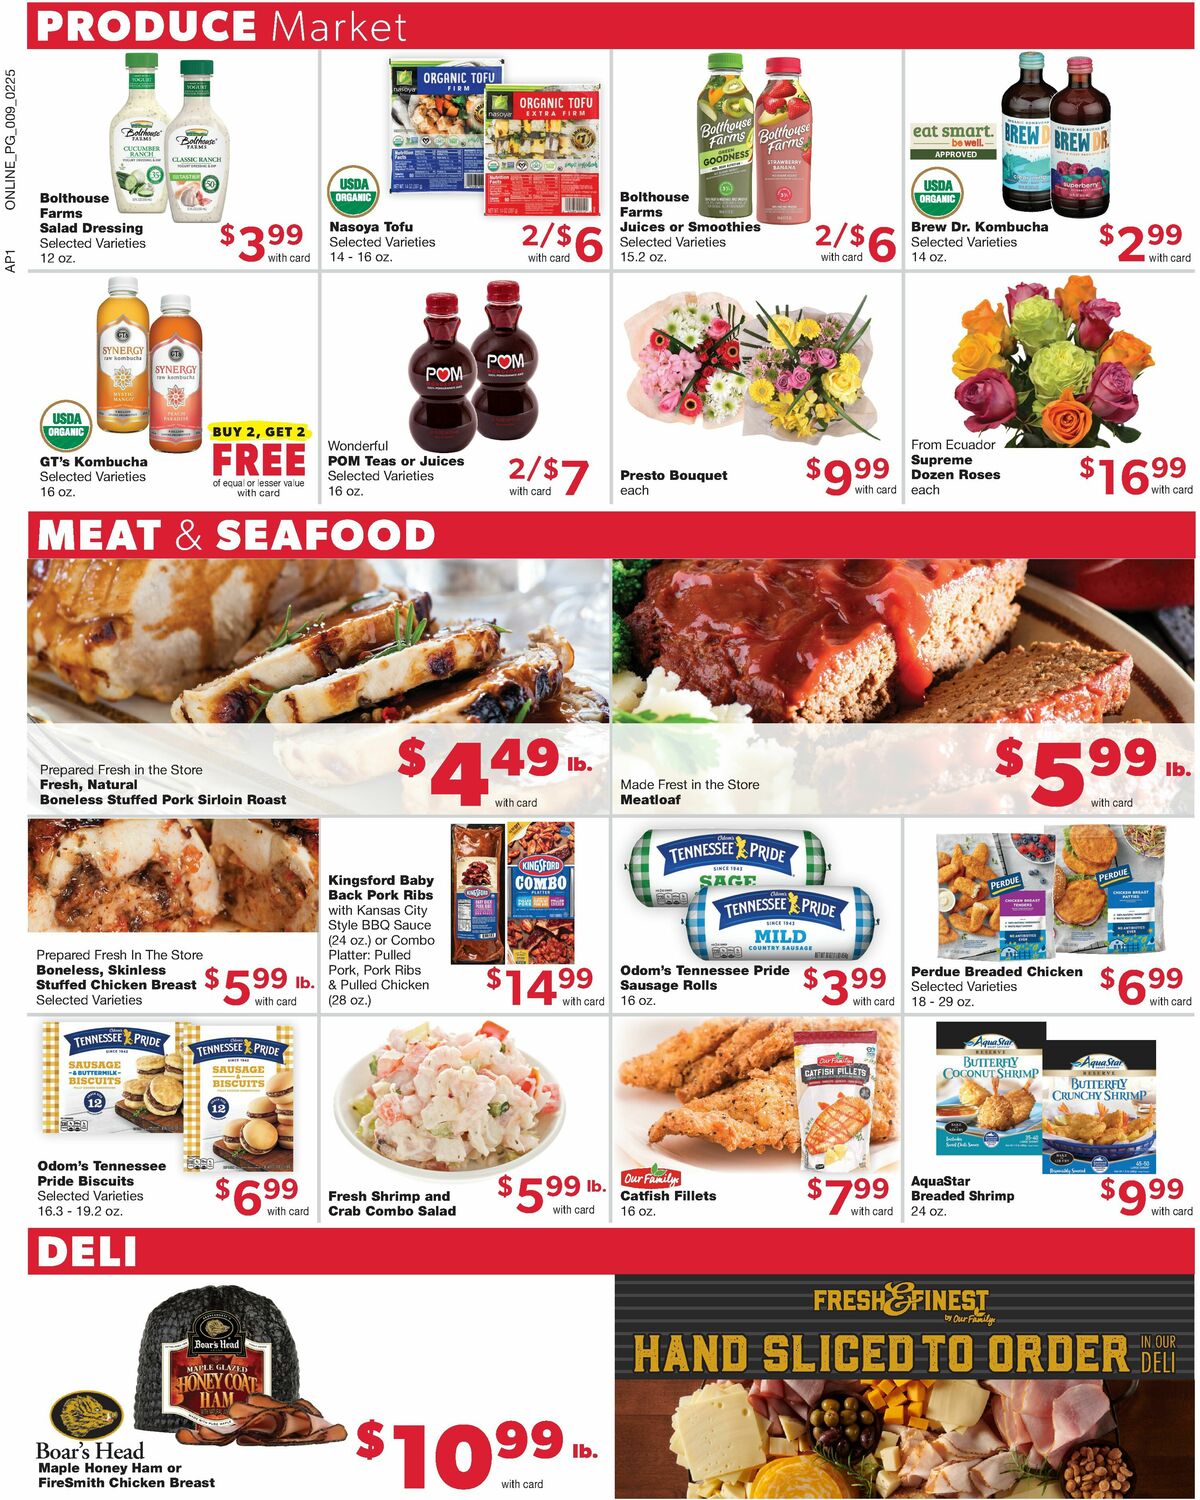 Family Fare Weekly Ad from February 26